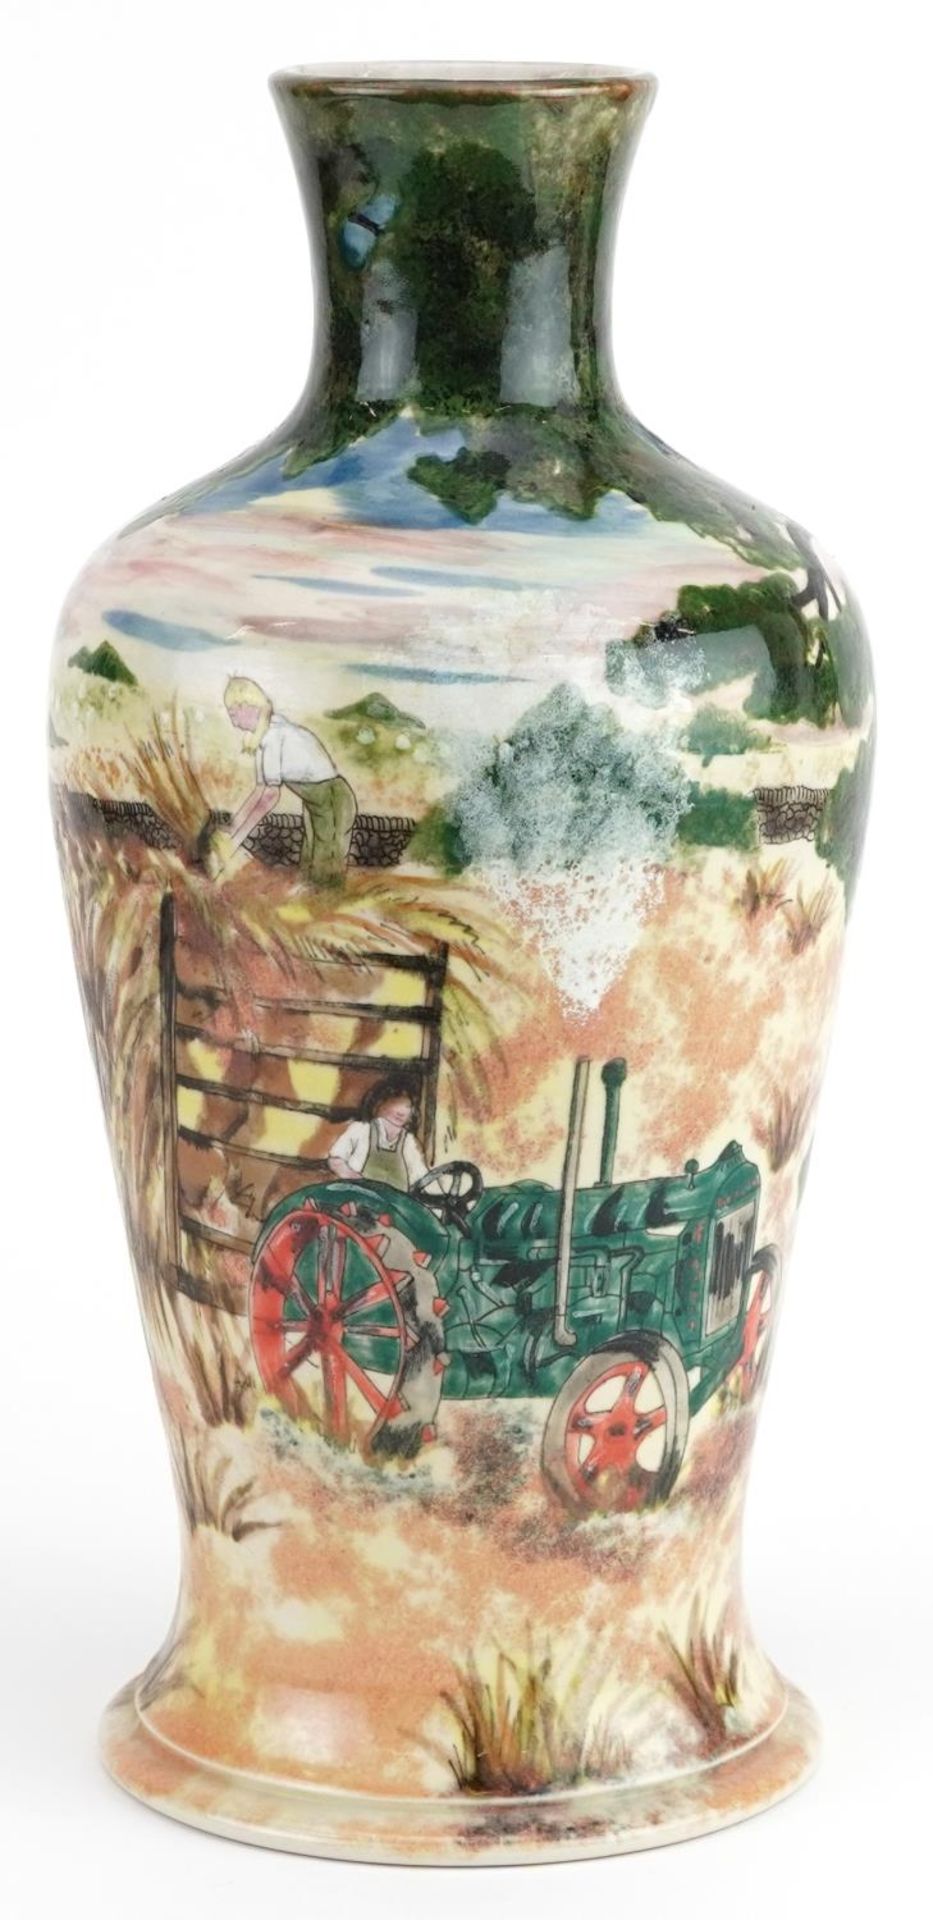 Large Cobridge baluster vase hand painted with farmers, limited edition 79/150, 31.5cm high